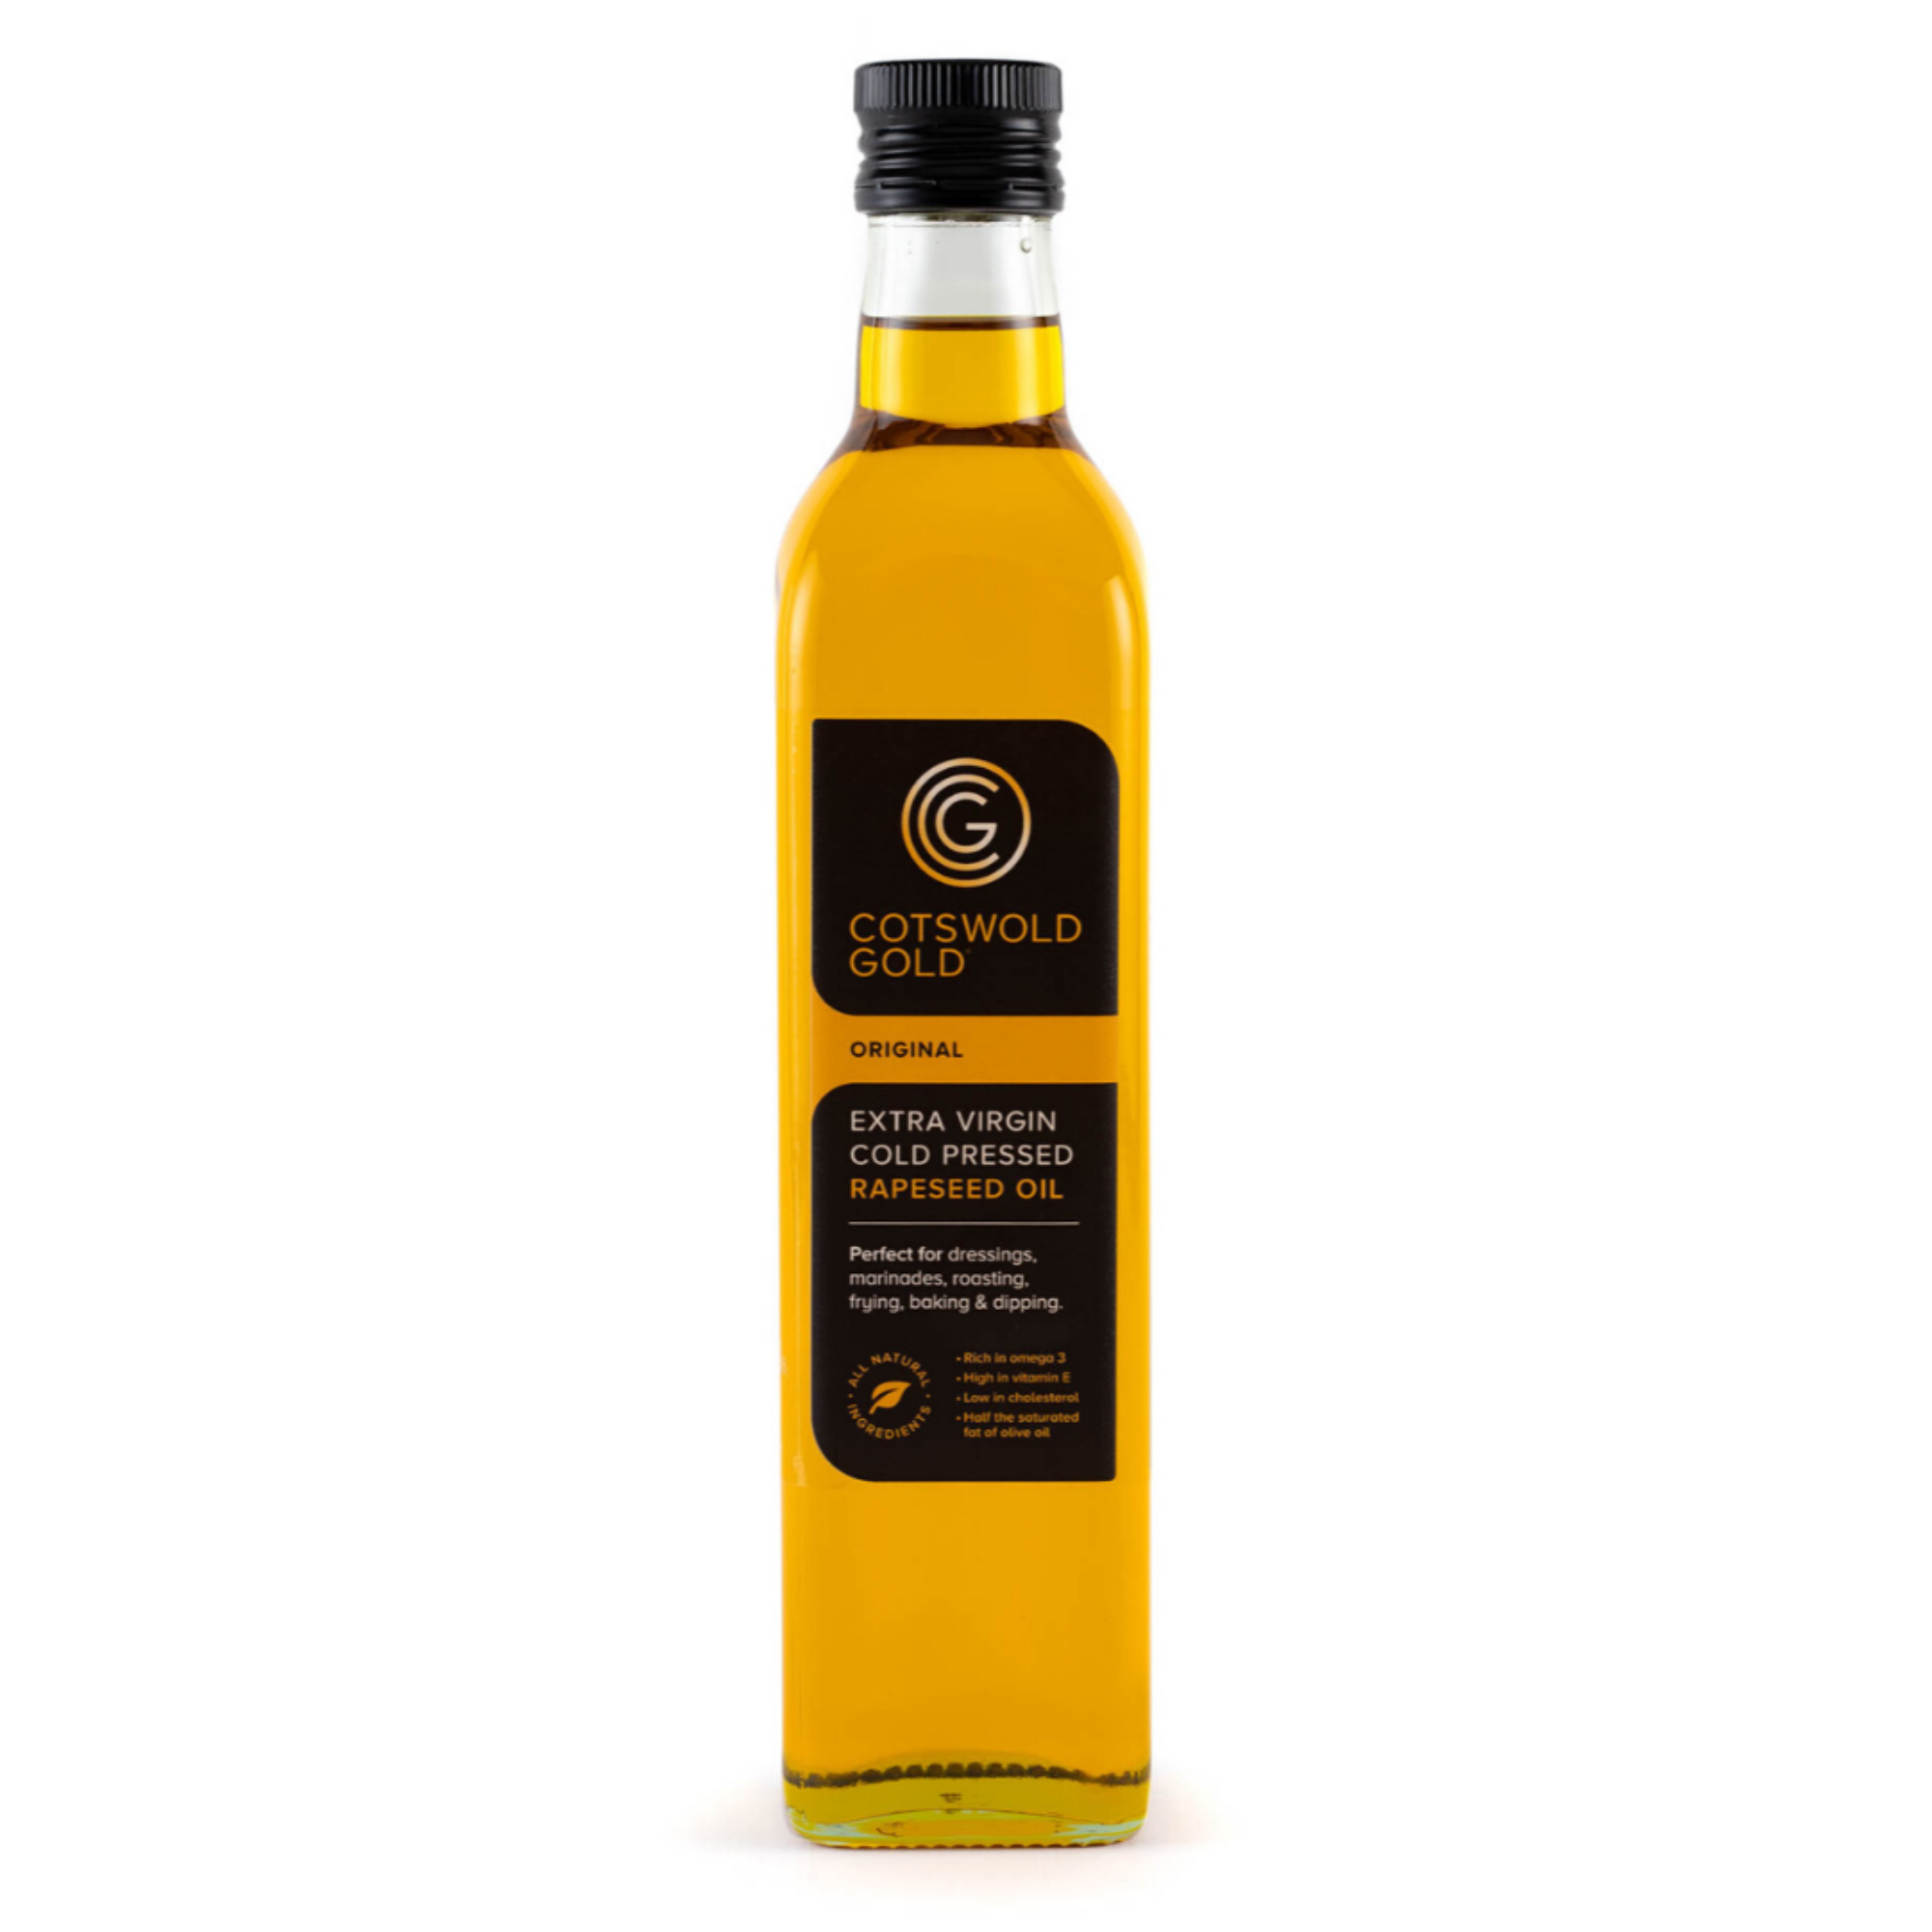 Cotswold Gold Extra Virgin Rapeseed Oil